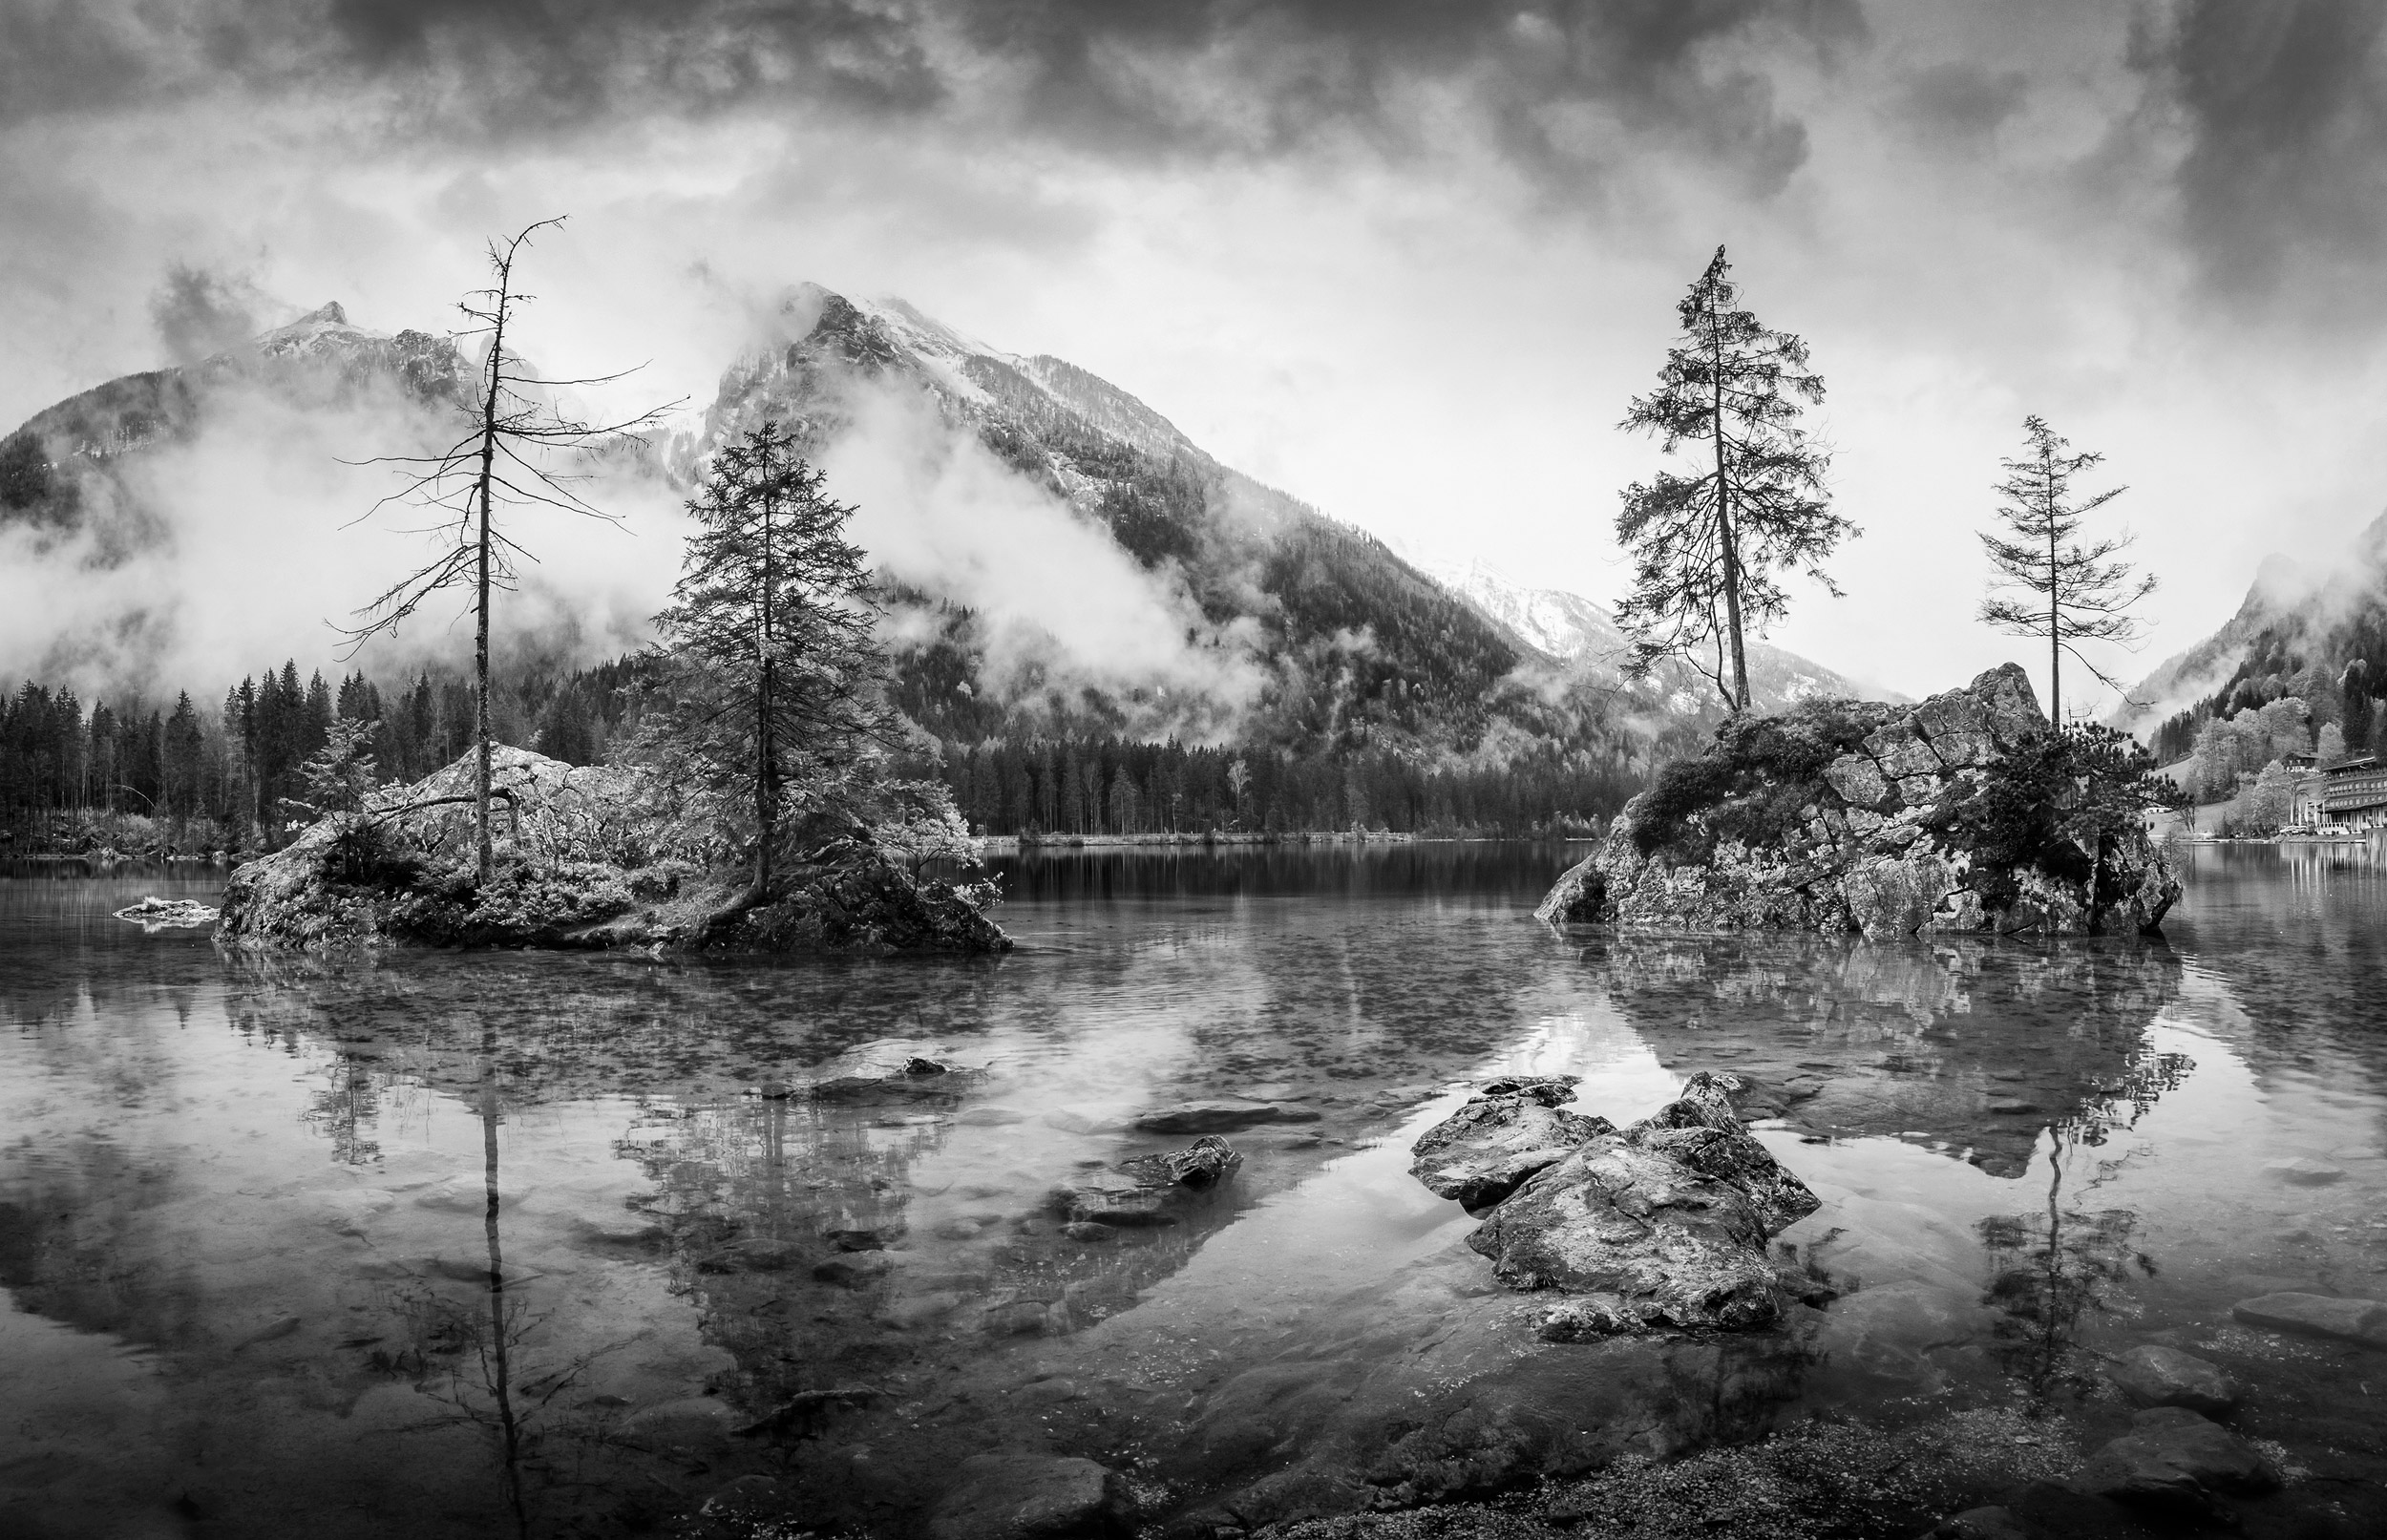 Misty summer morning on the Hintersee lake in German Alps